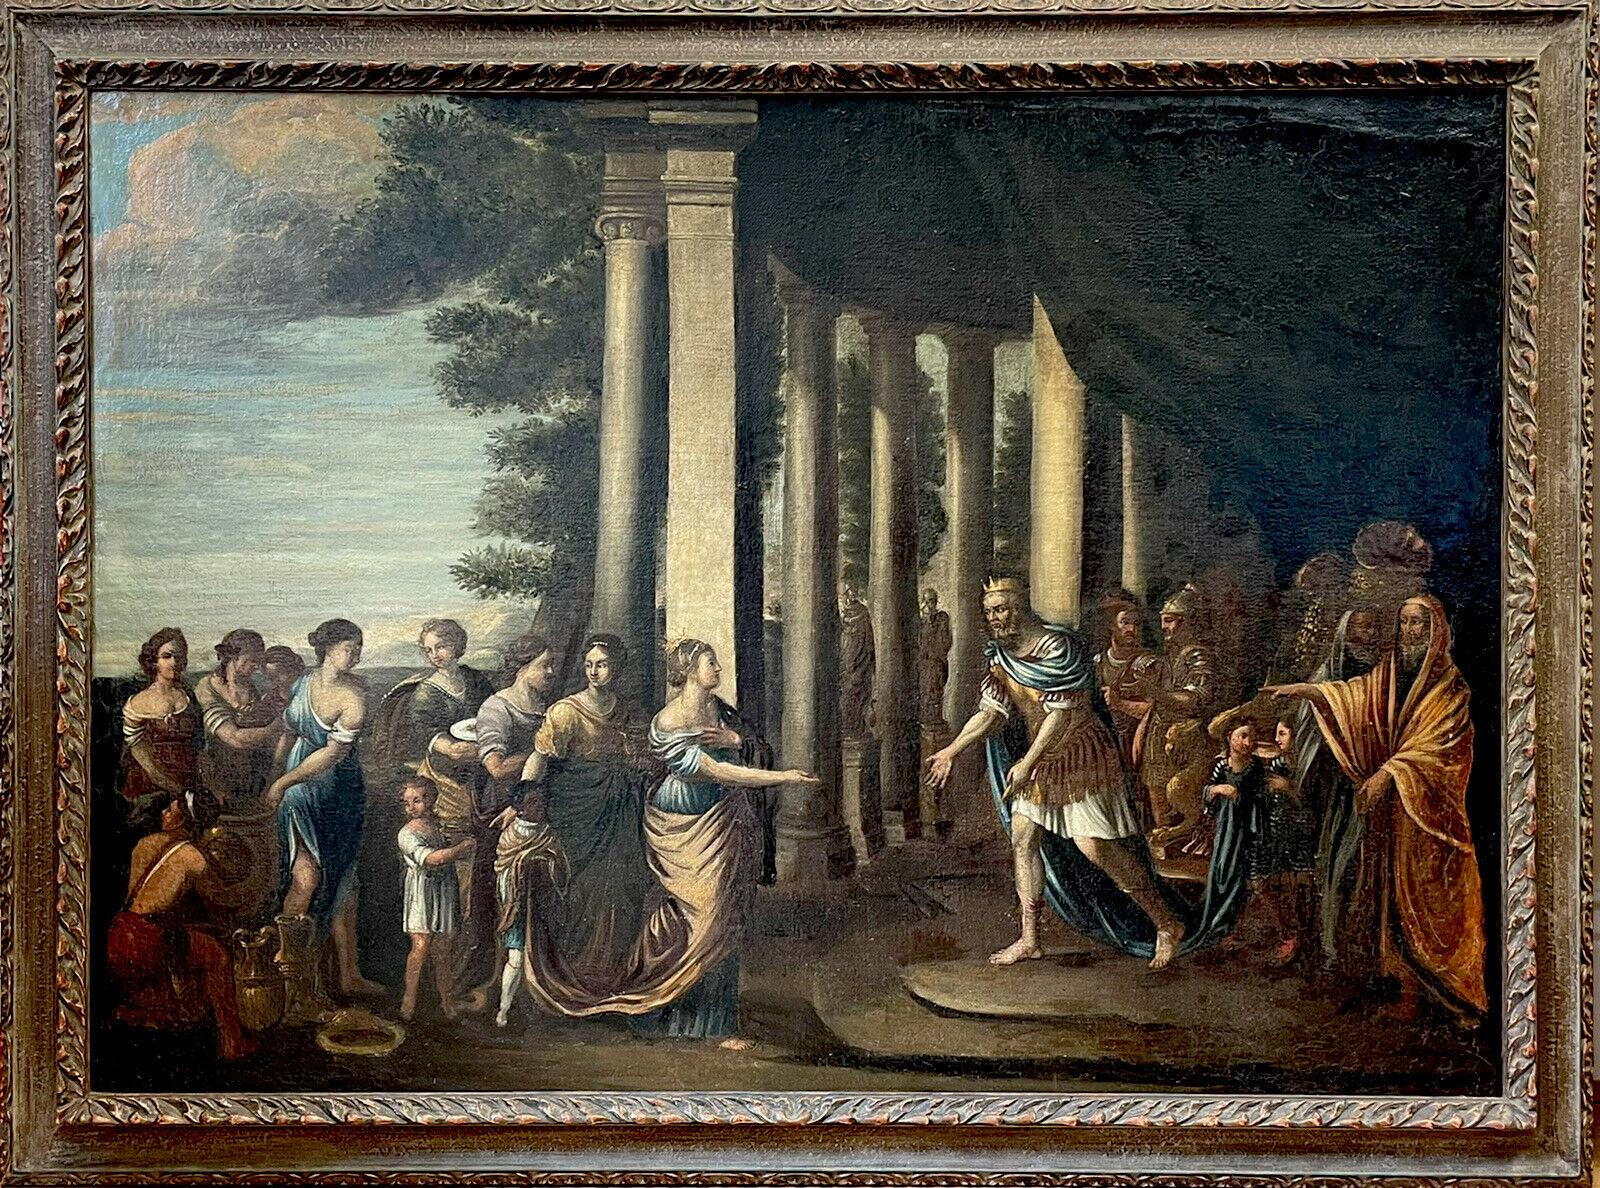 HUGE 17thC ITALIAN OLD MASTER OIL PAINTING - KING & COURT FIGURES ROMAN BUILDING